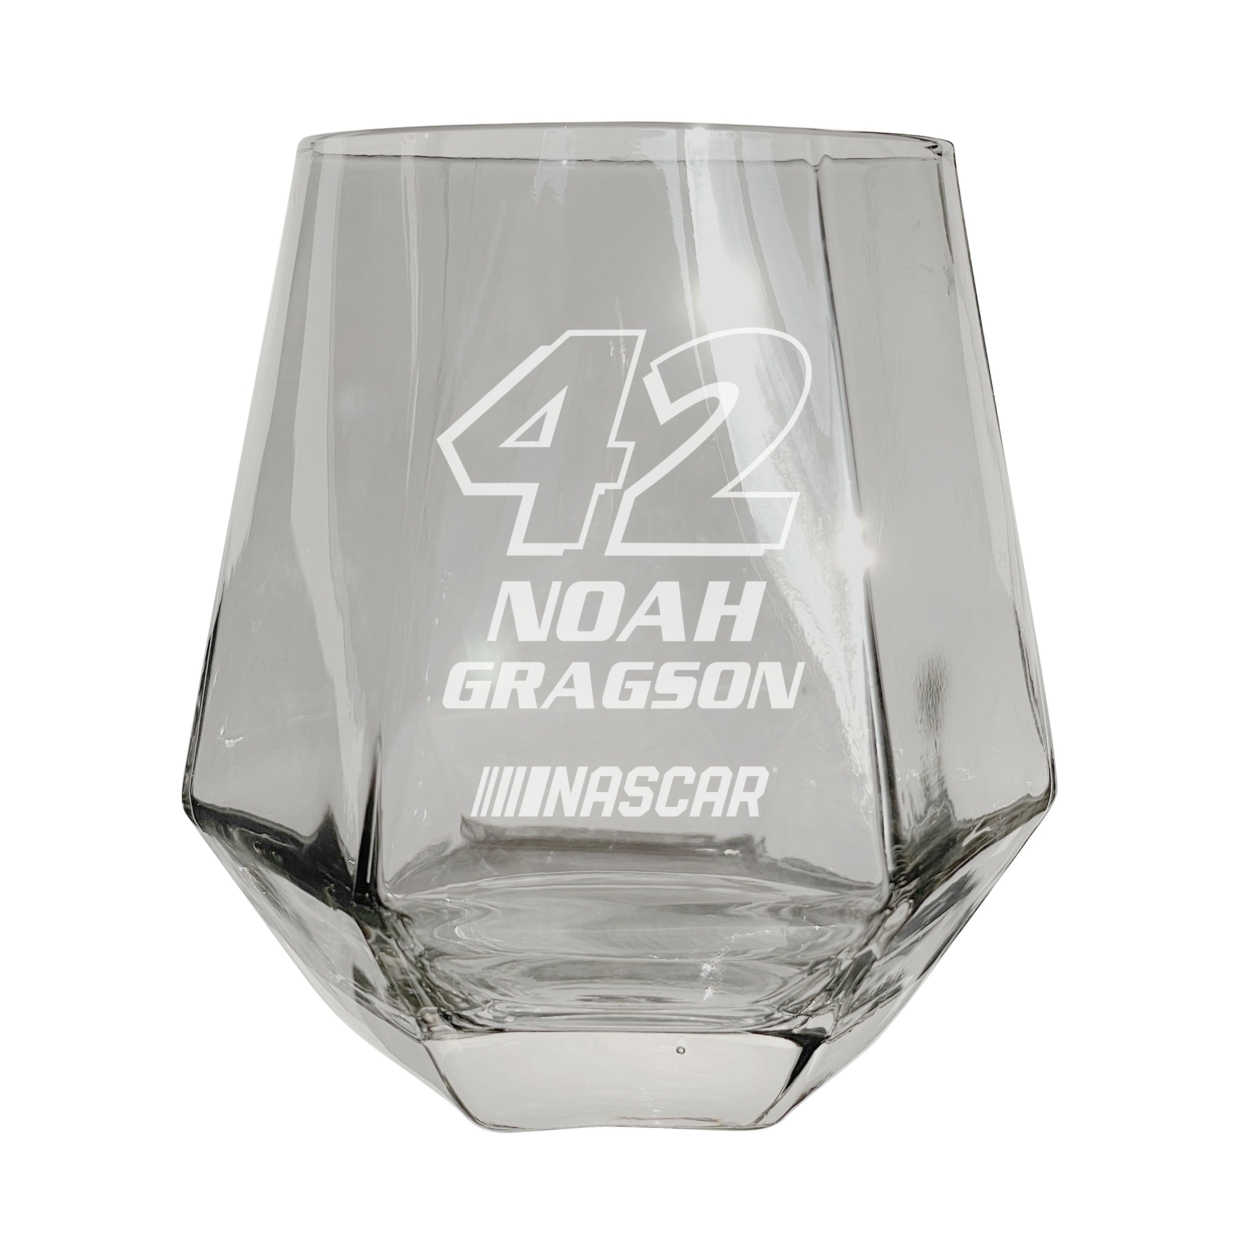 #42 Noah Gragson Officially Licensed 10 Oz Engraved Diamond Wine Glass - Clear, Single